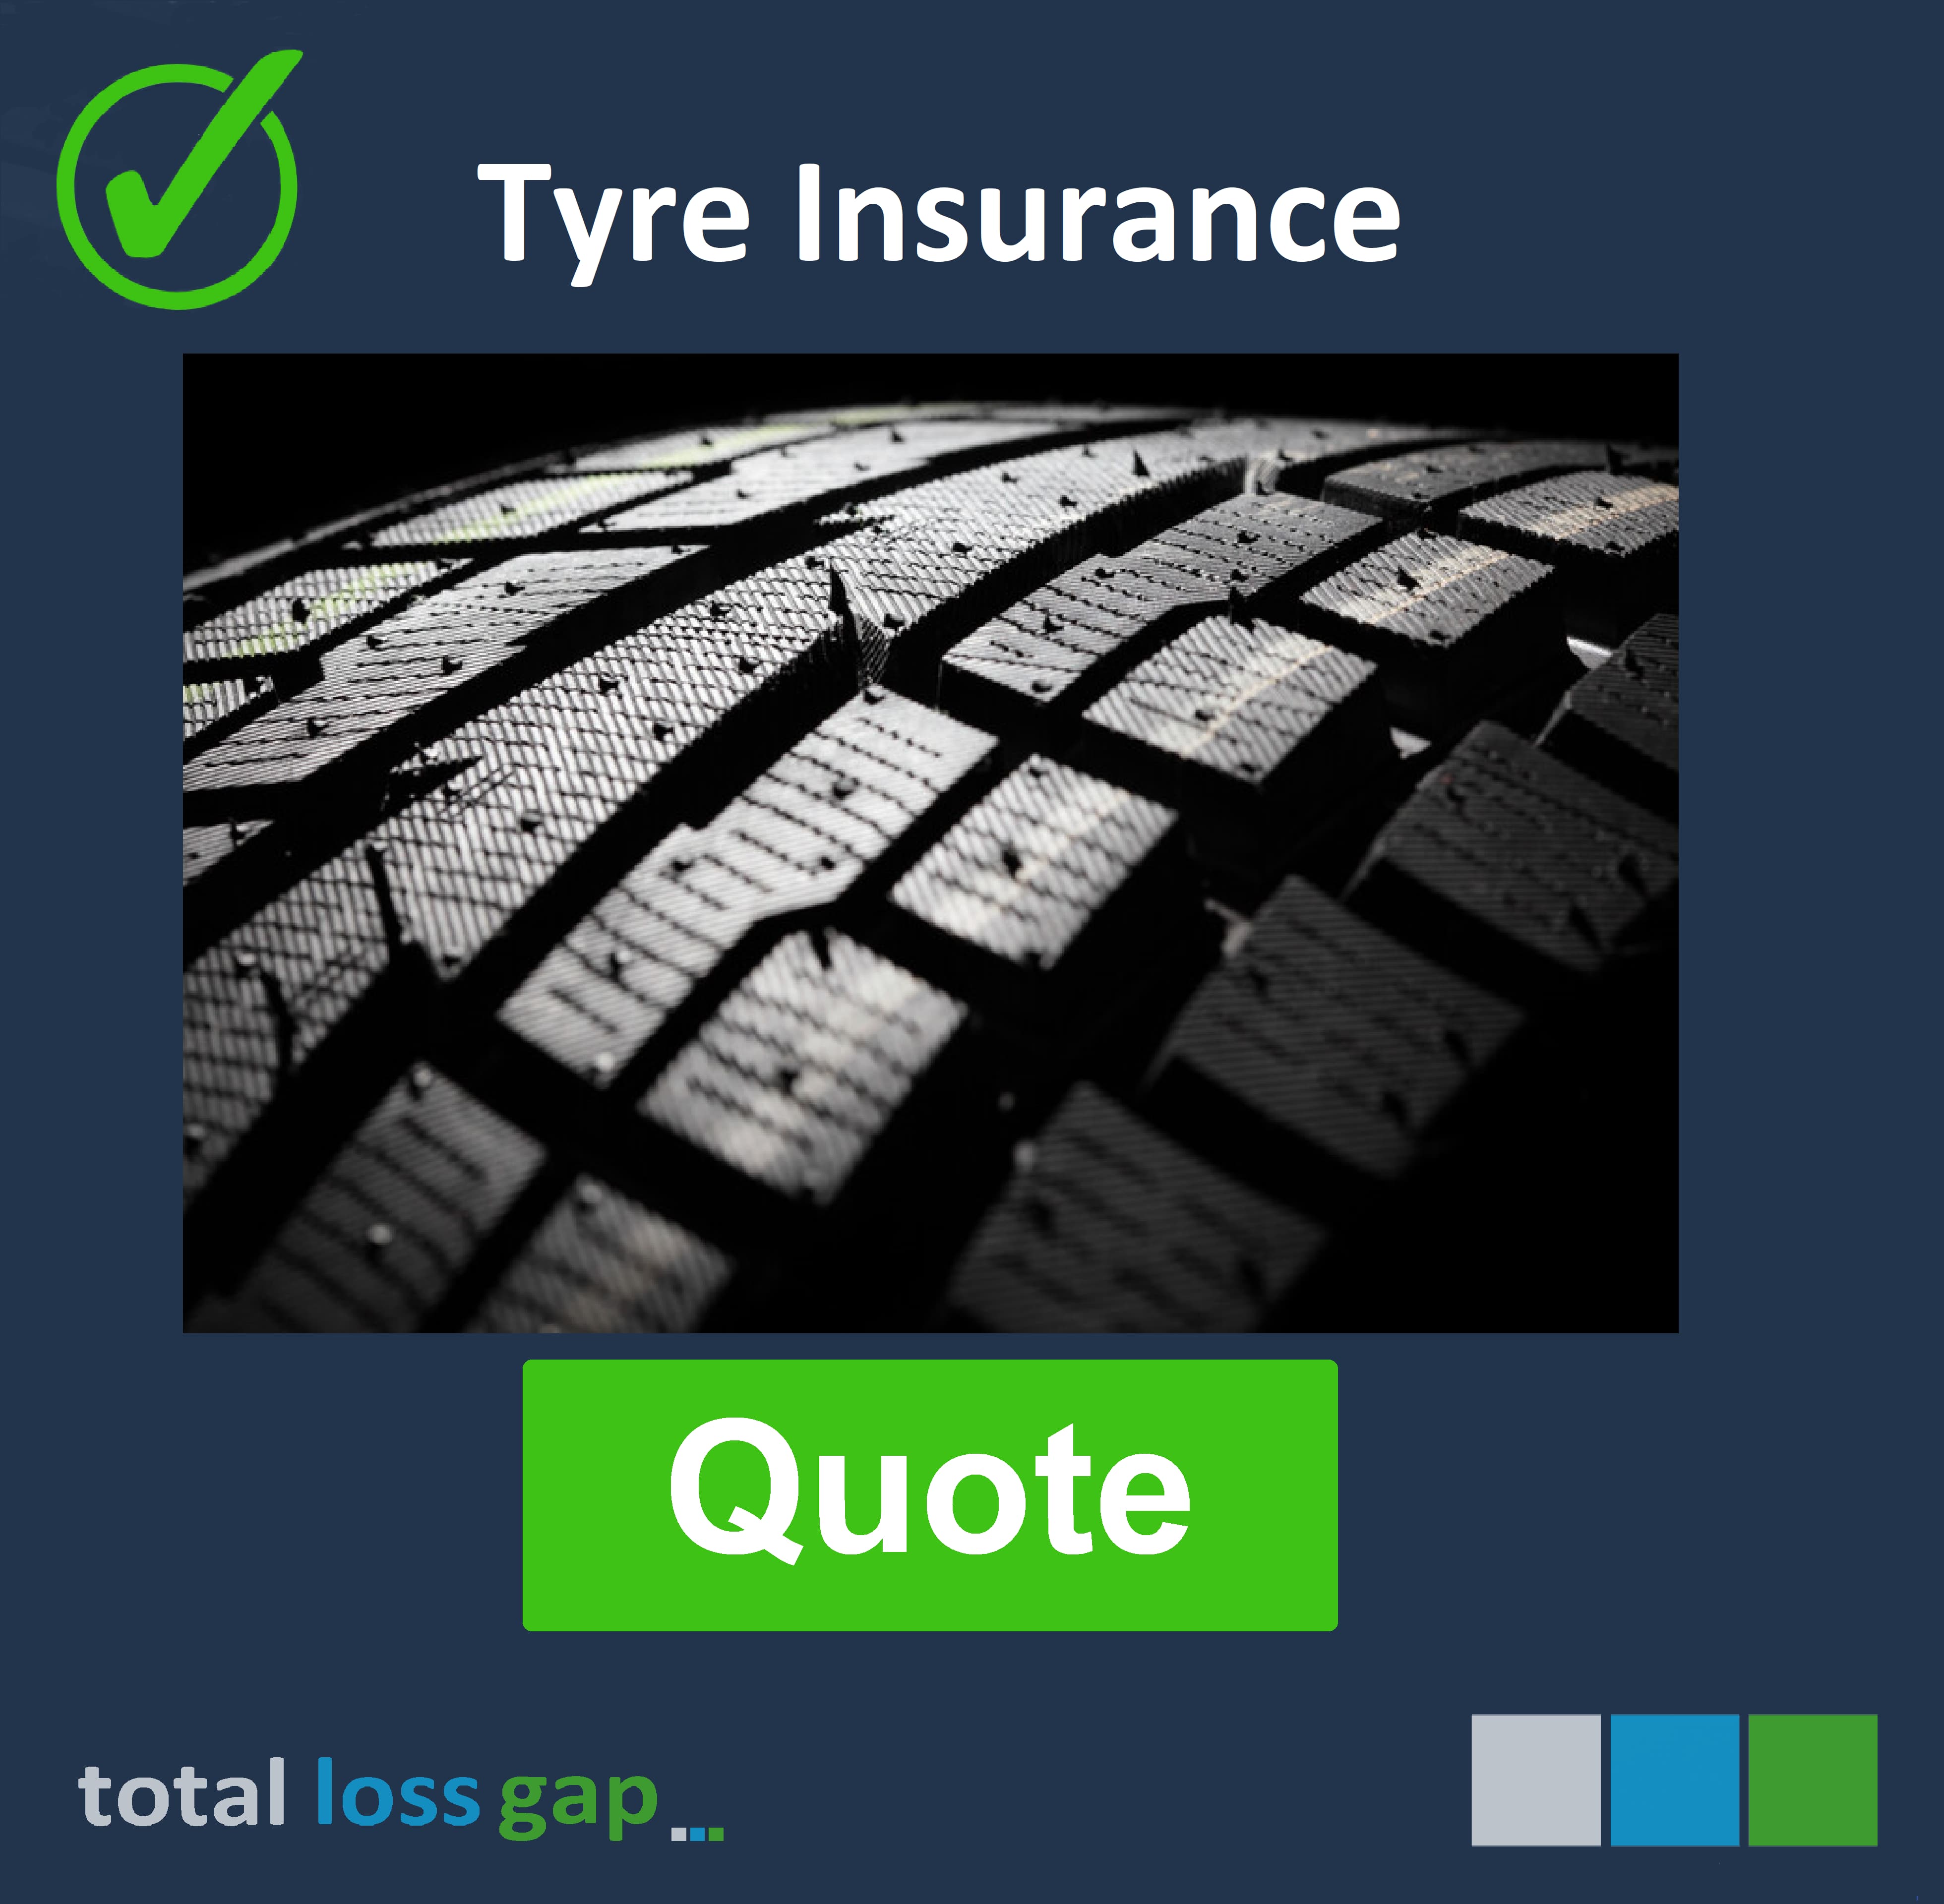 Tyre Insurance Quote